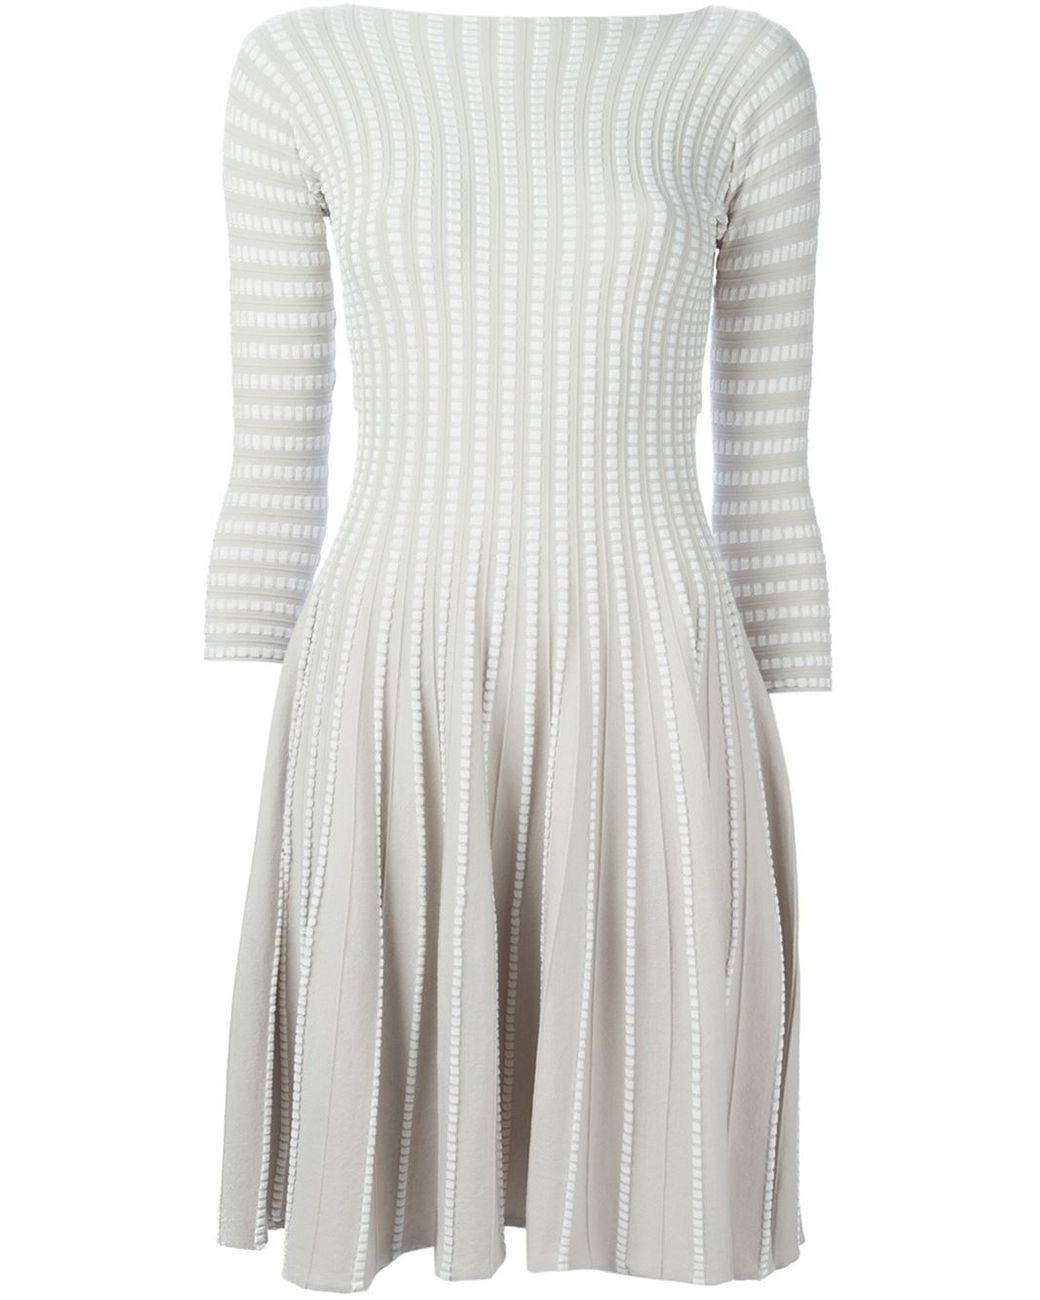 Emporio Armani Pleated Knit Dress in Gray | Lyst